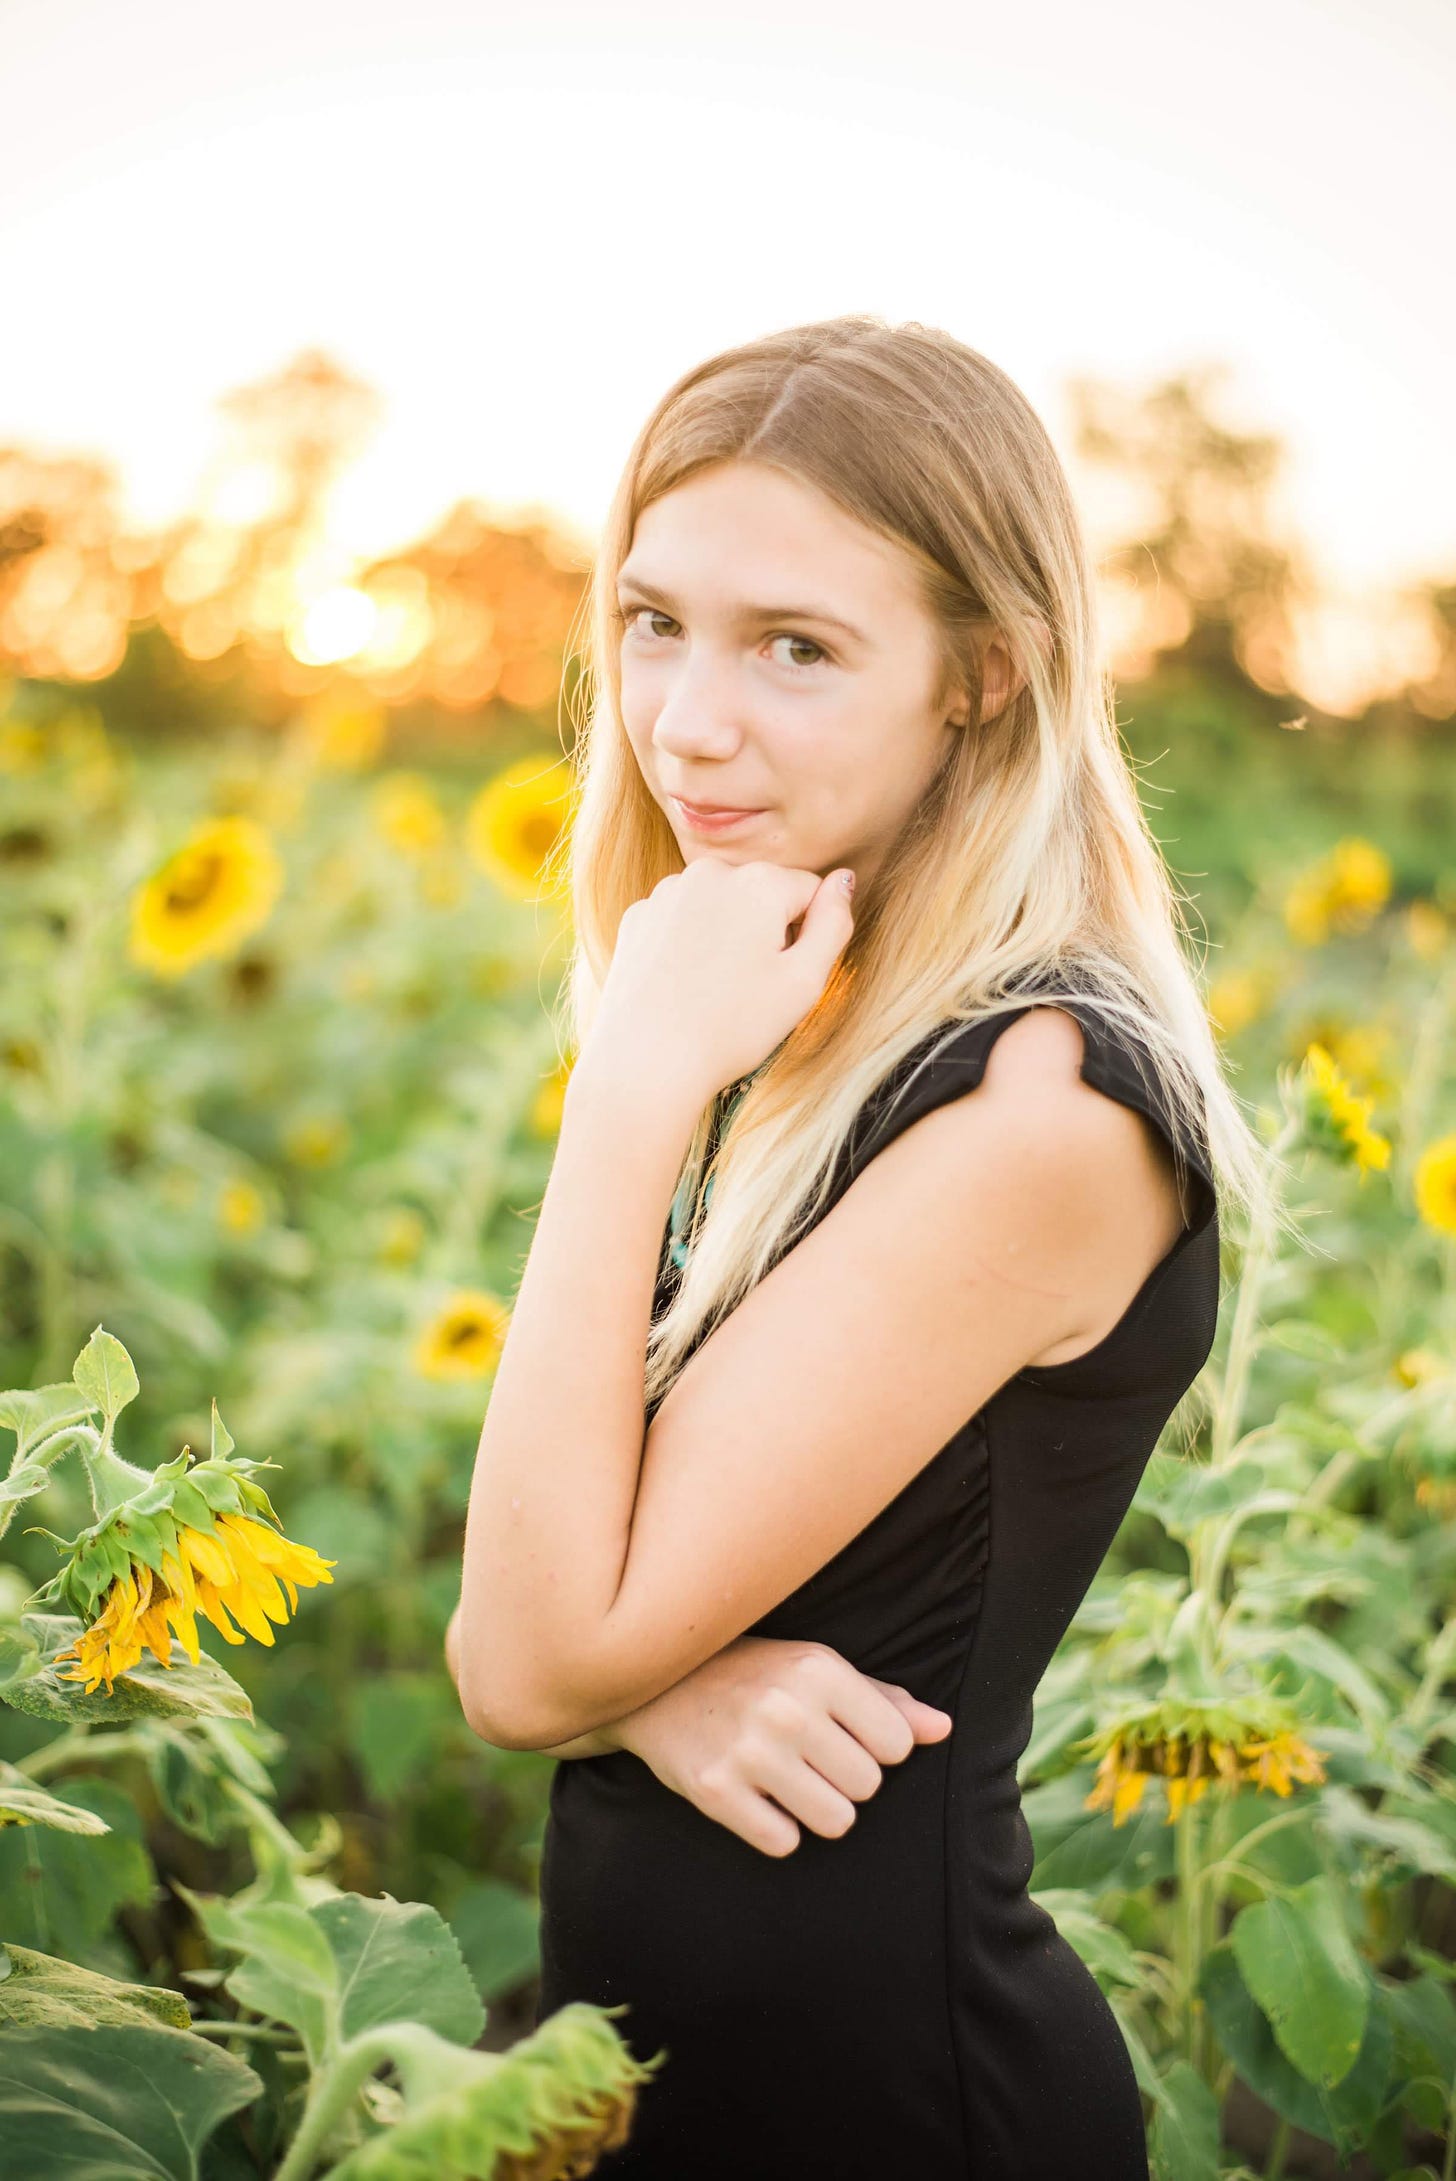 A 12-year-old-girl in a black dress in a field of sunflowers